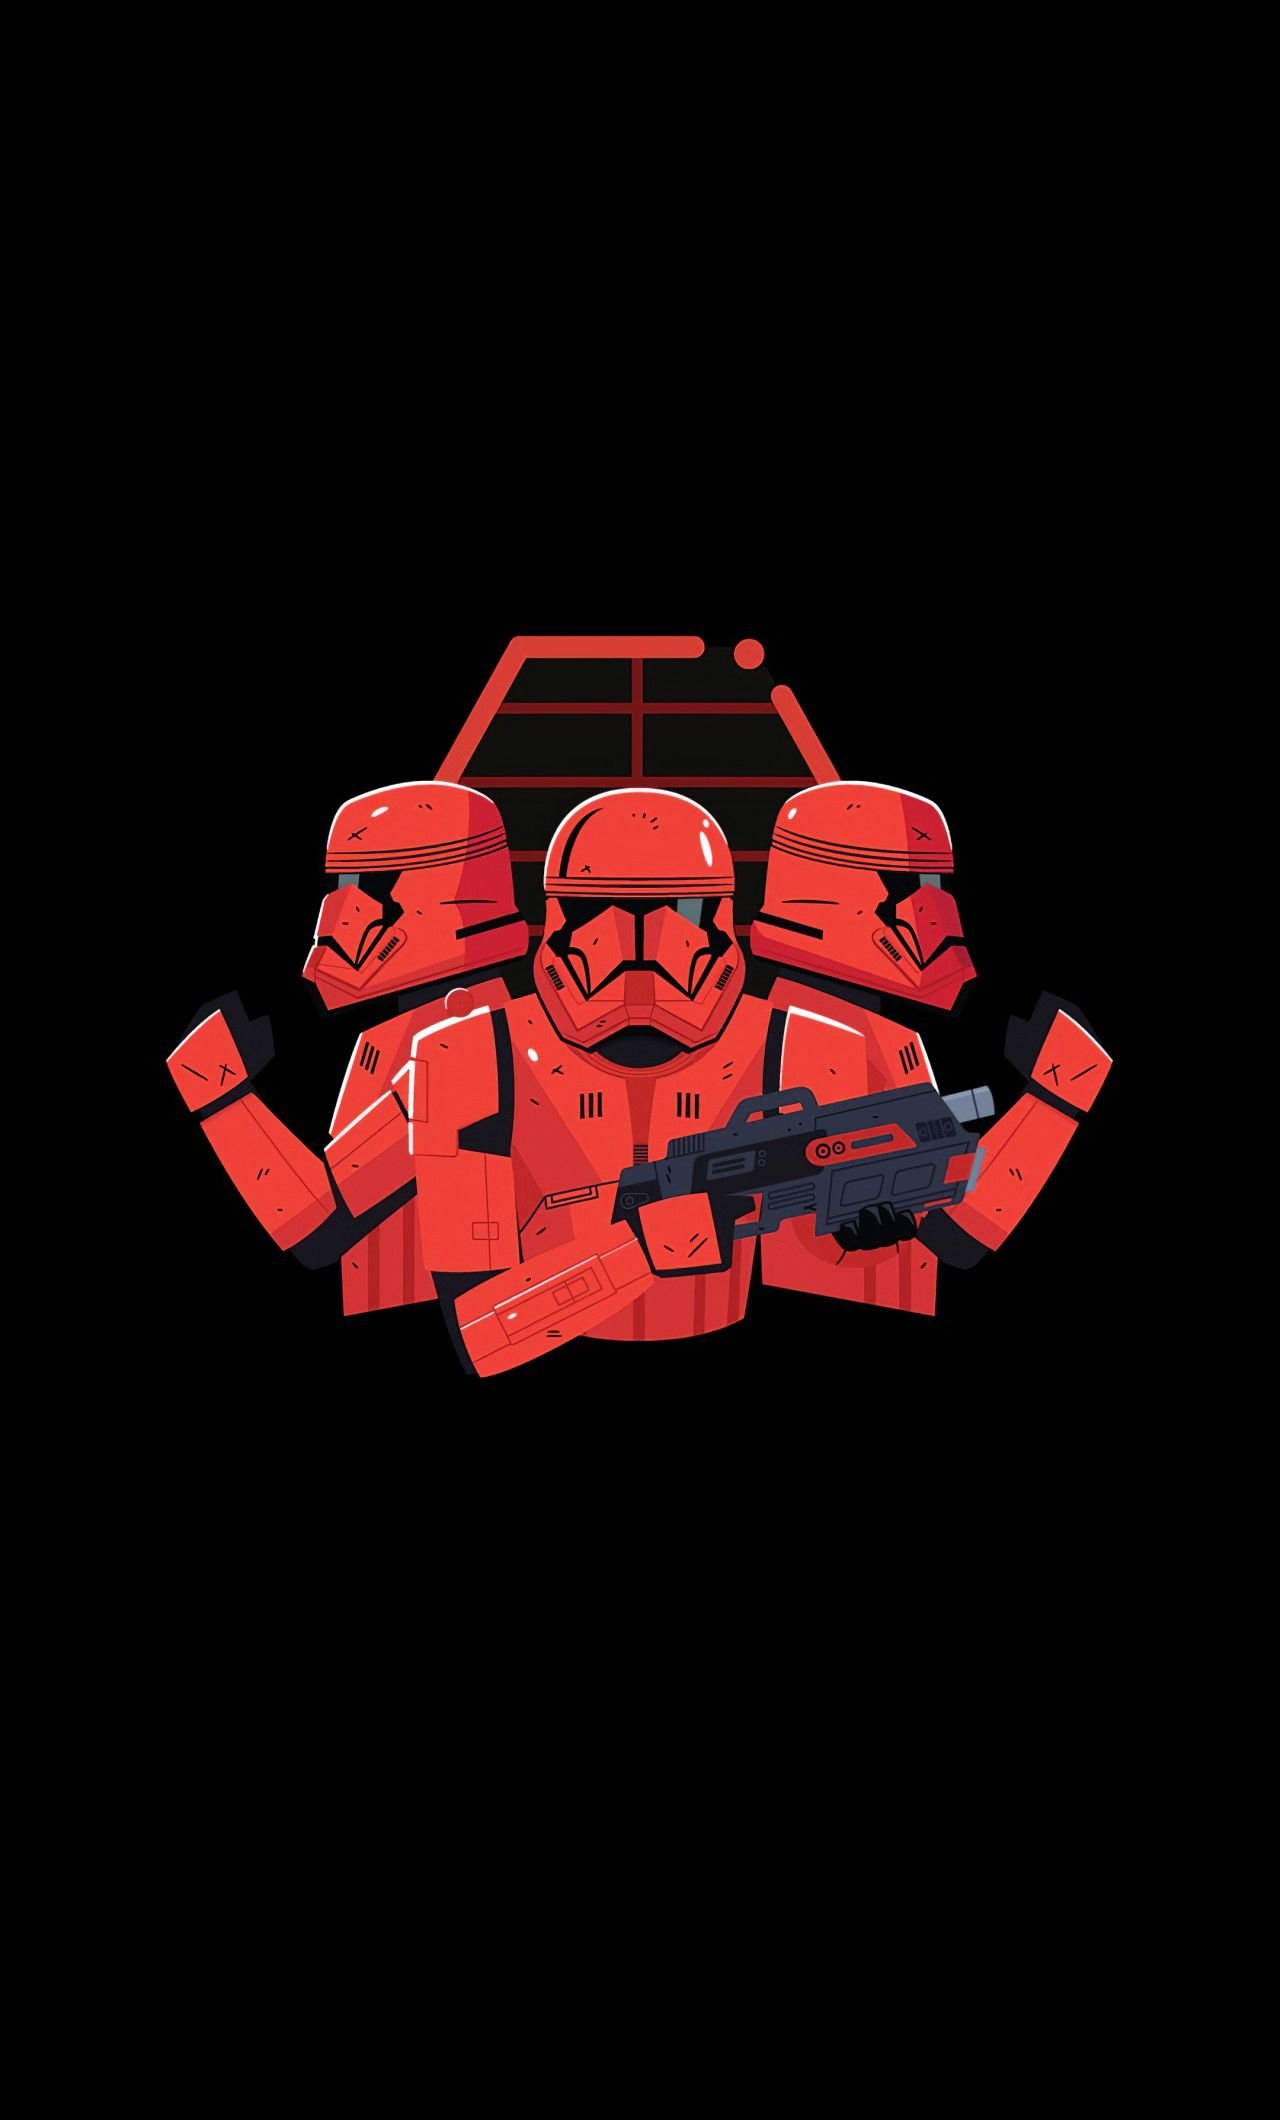 1280x2120 Star Wars Stormtrooper Minimal Art iPhone 6+ HD 4k Wallpapers, Image, Backgrounds, Photos and Pictures